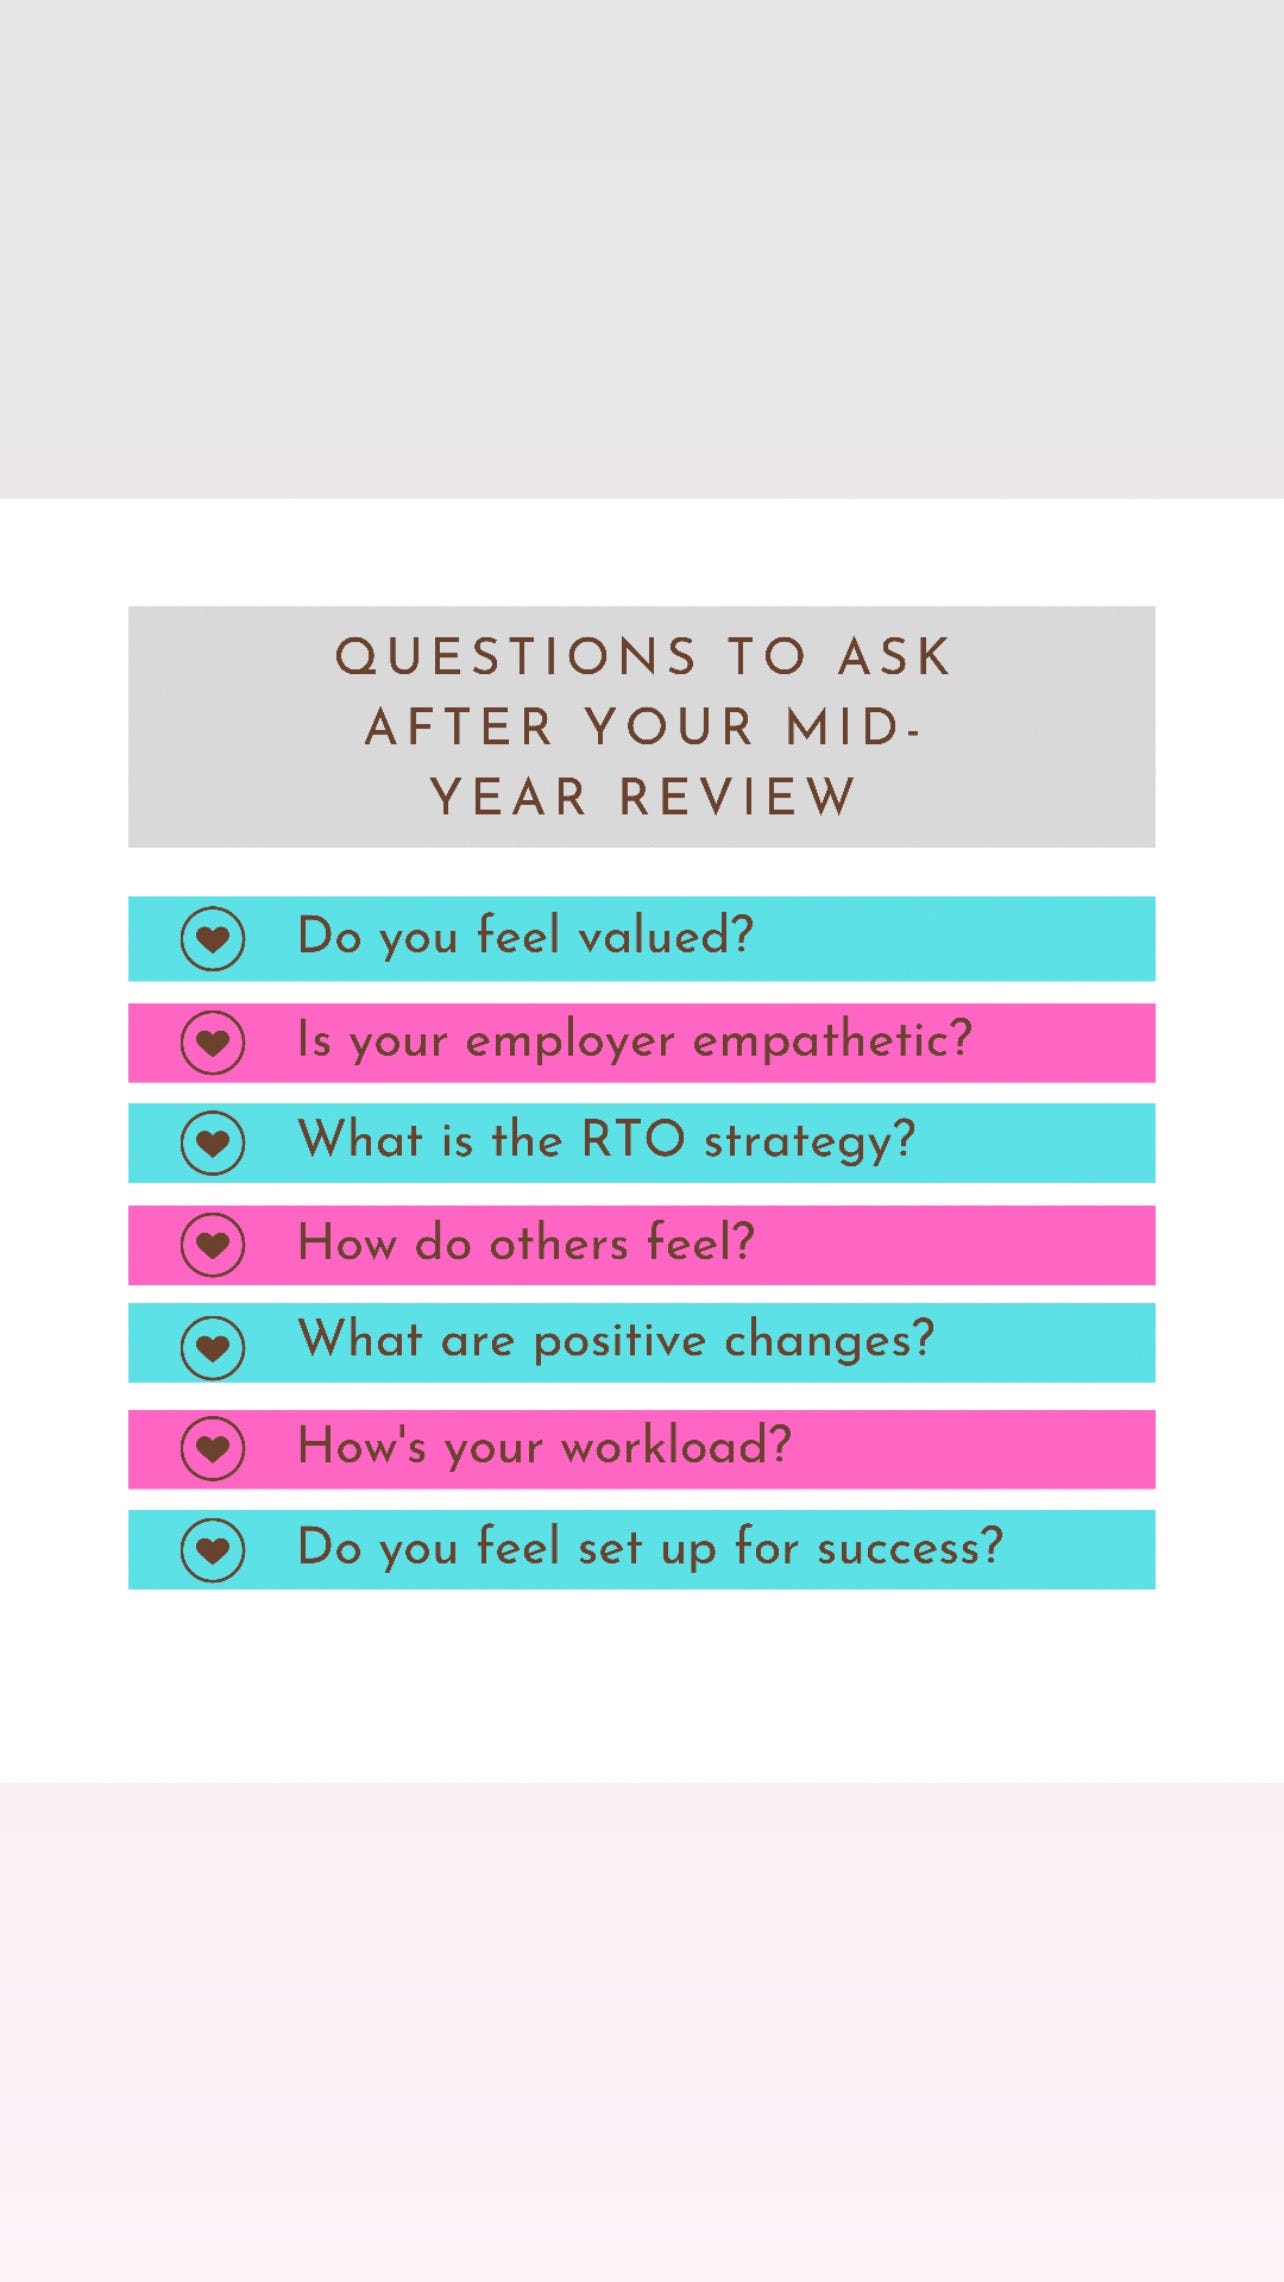 Questions To Ask After Your Mid-Year Review. | by Nola Simon | Medium